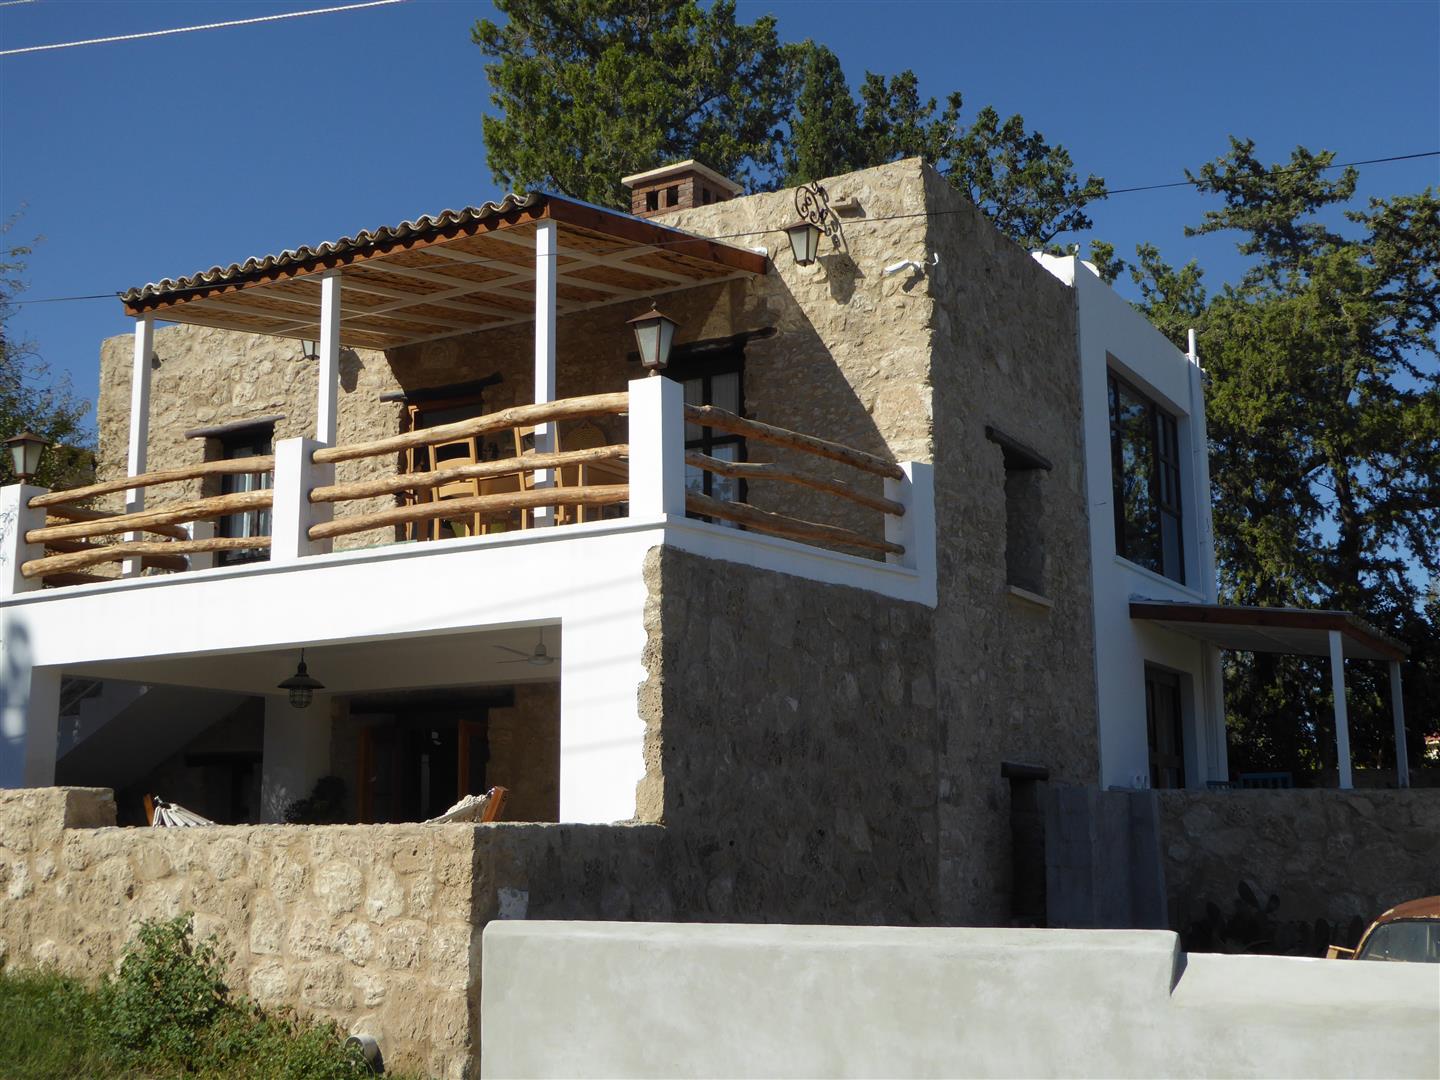 3 bed detached house for sale, Ozankoy 26